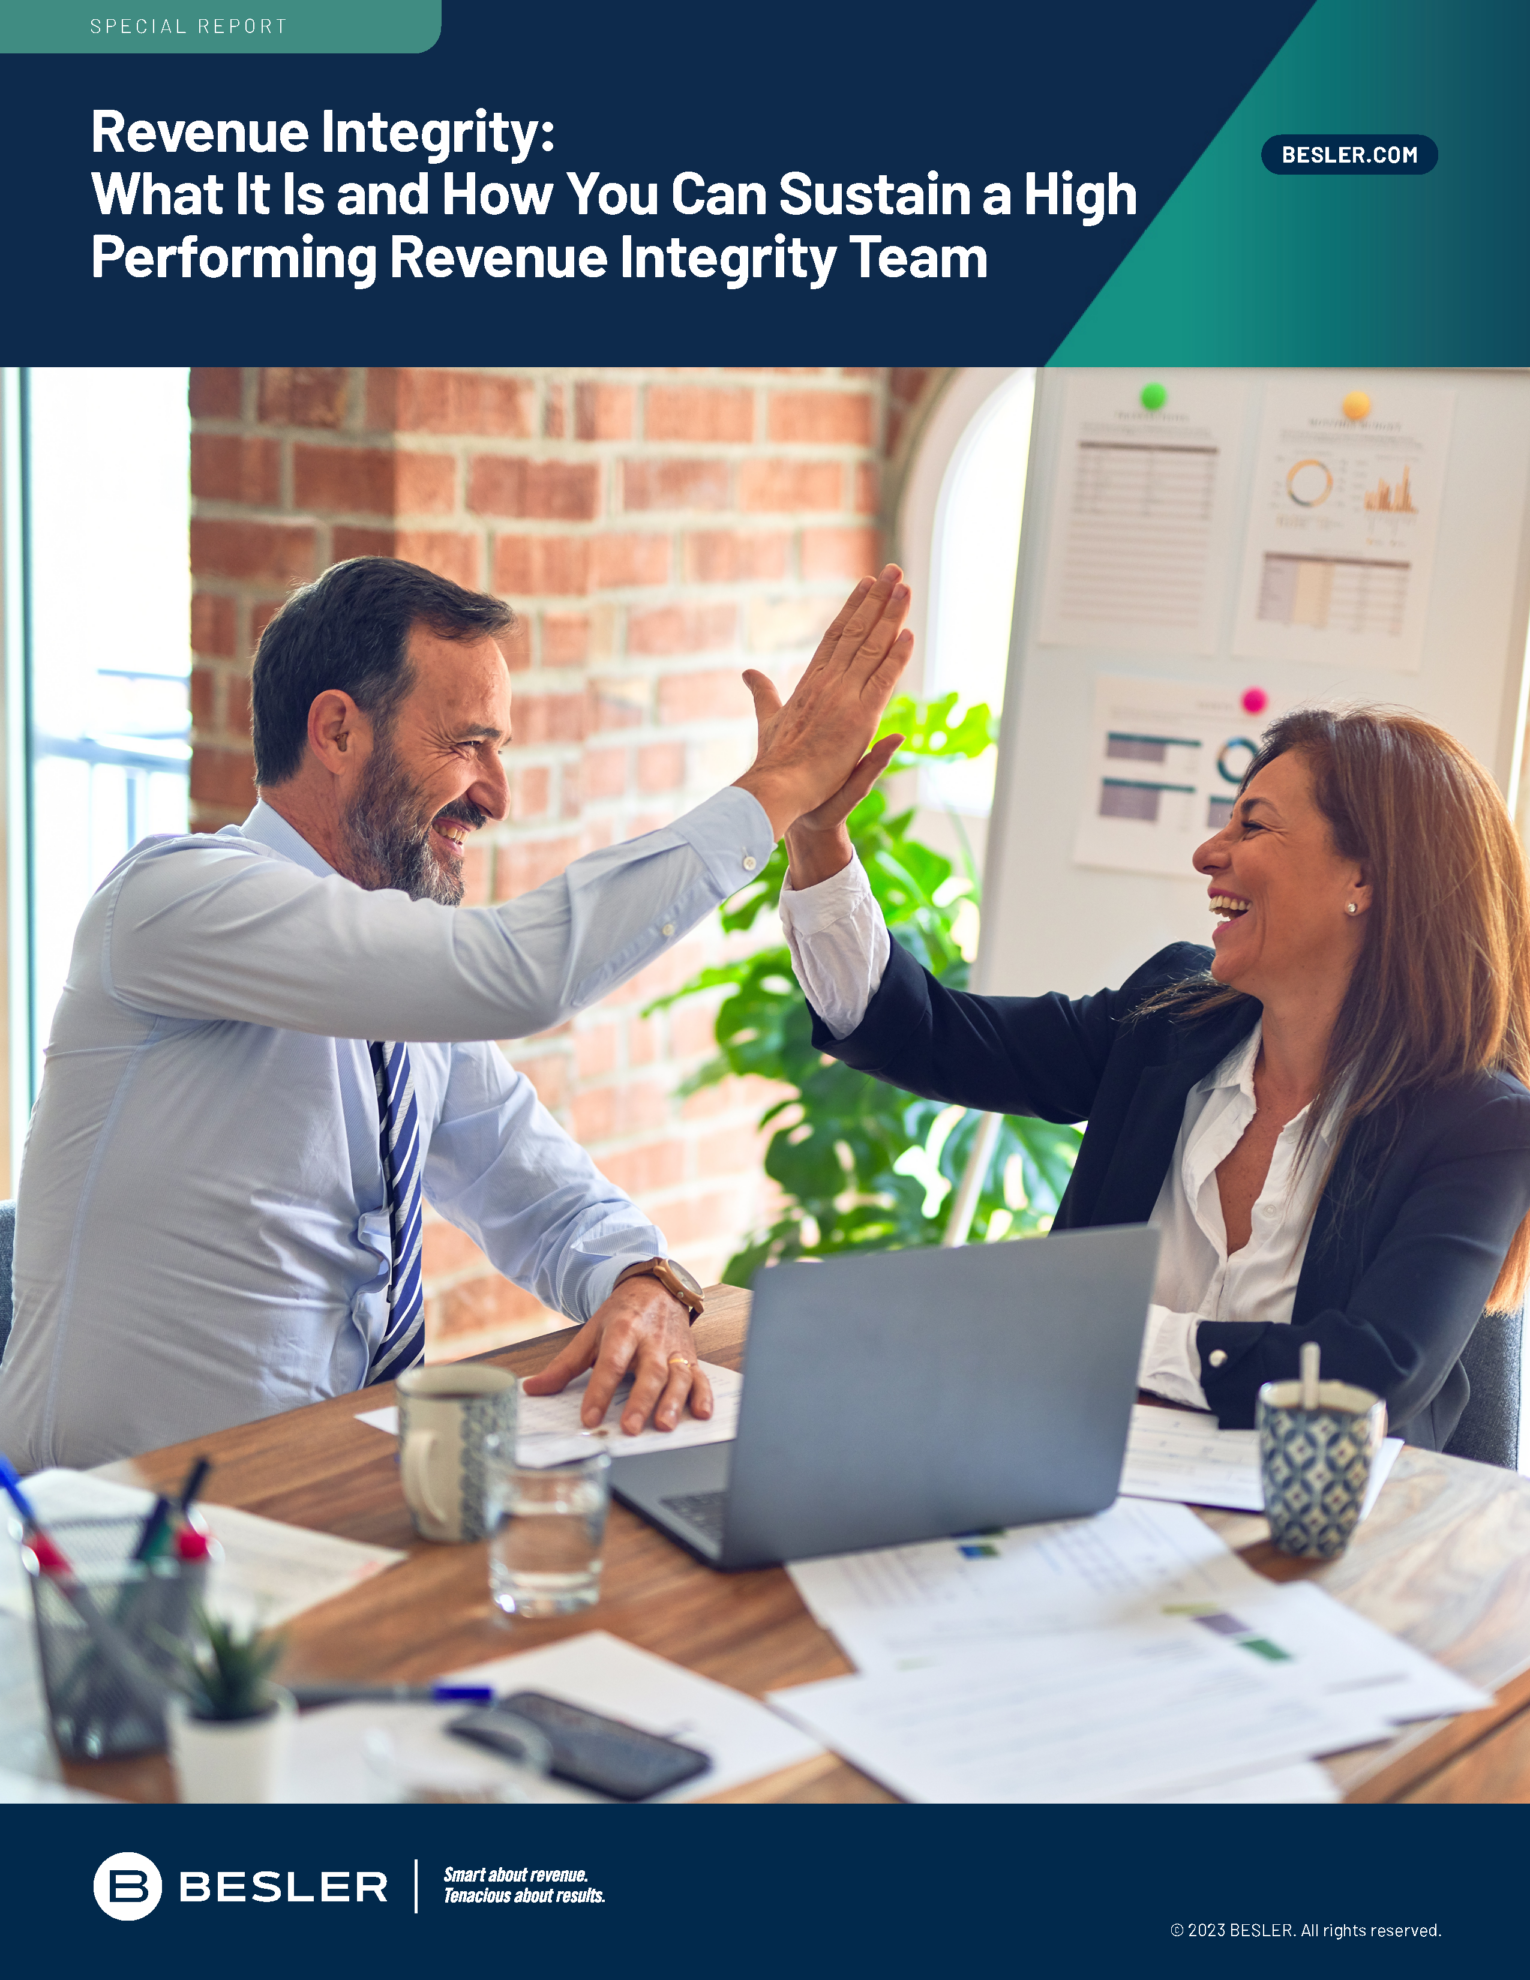 BESLER Special Report Revenue Integrity-What It Is and How You Can Sustain a High Performing Revenue Integrity Team